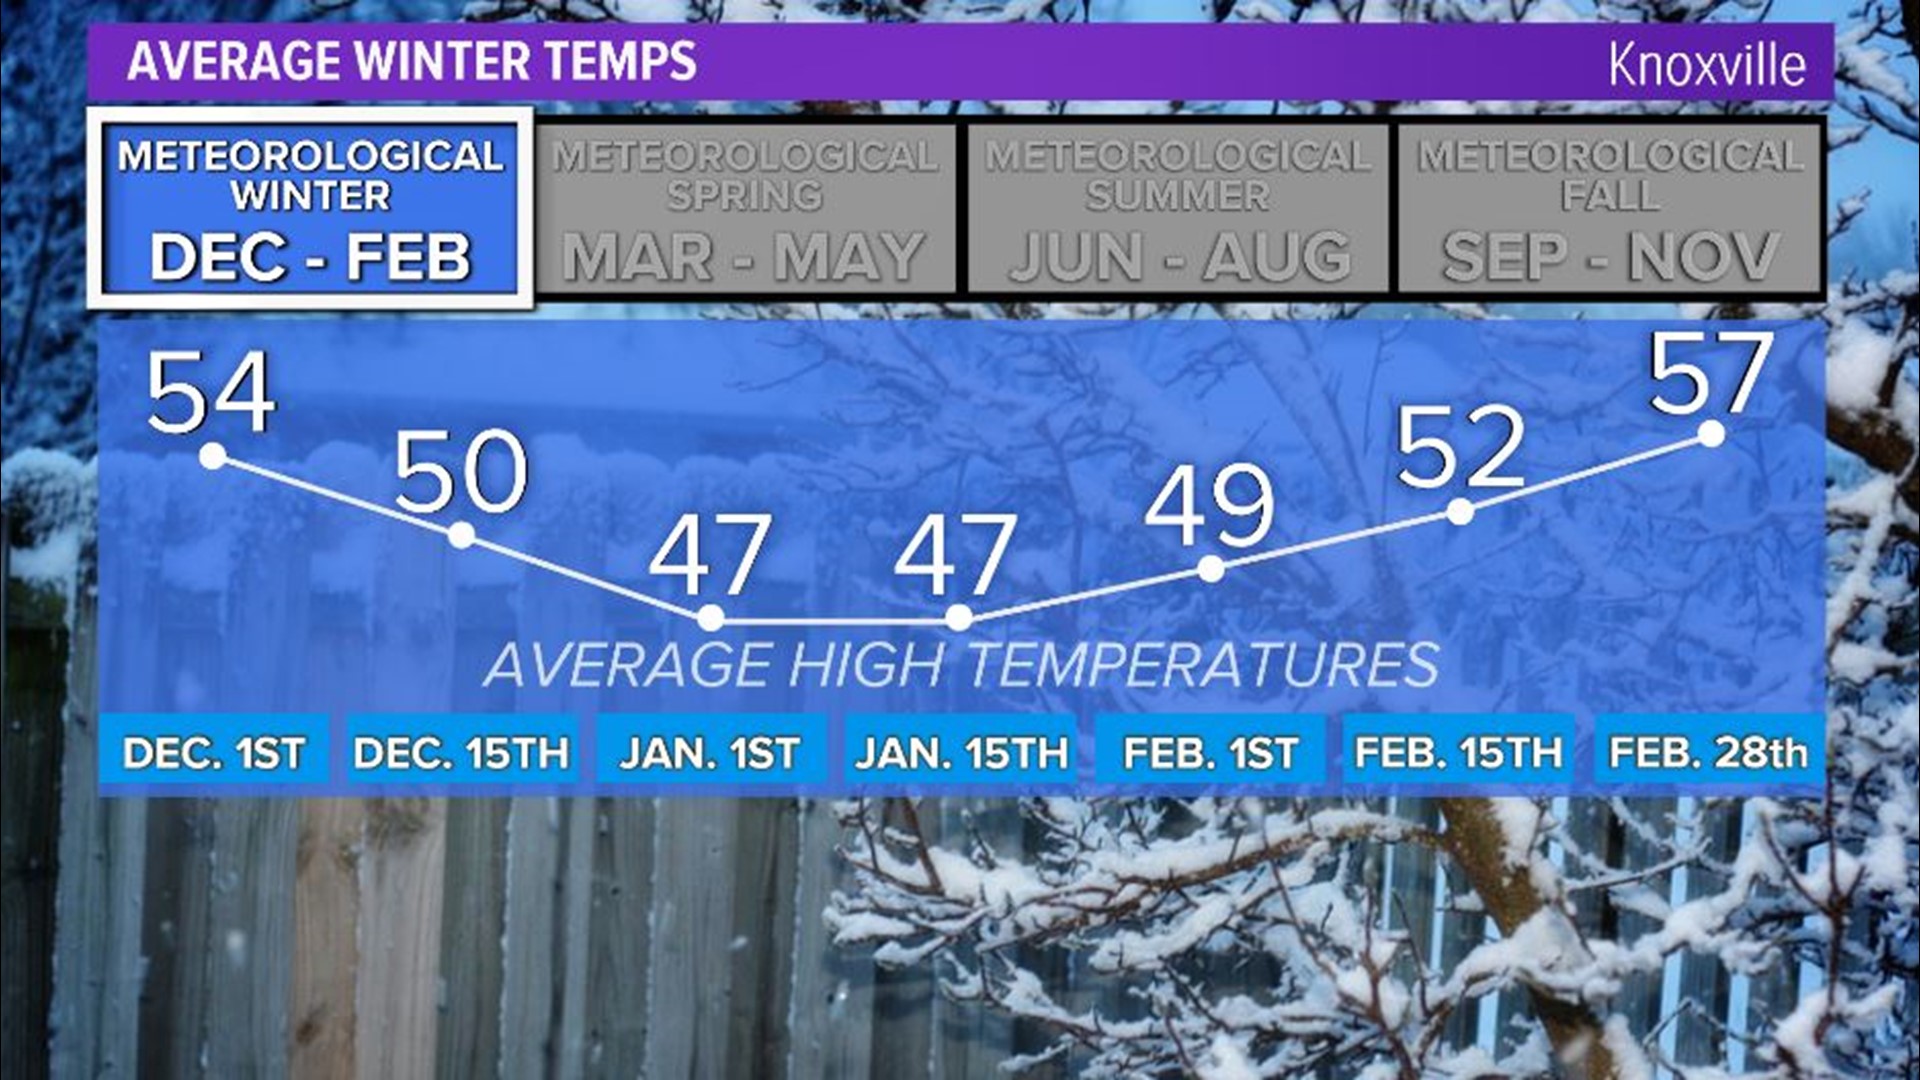 Temperatures have been above average so far in 2019 but colder weather will be returning this week.